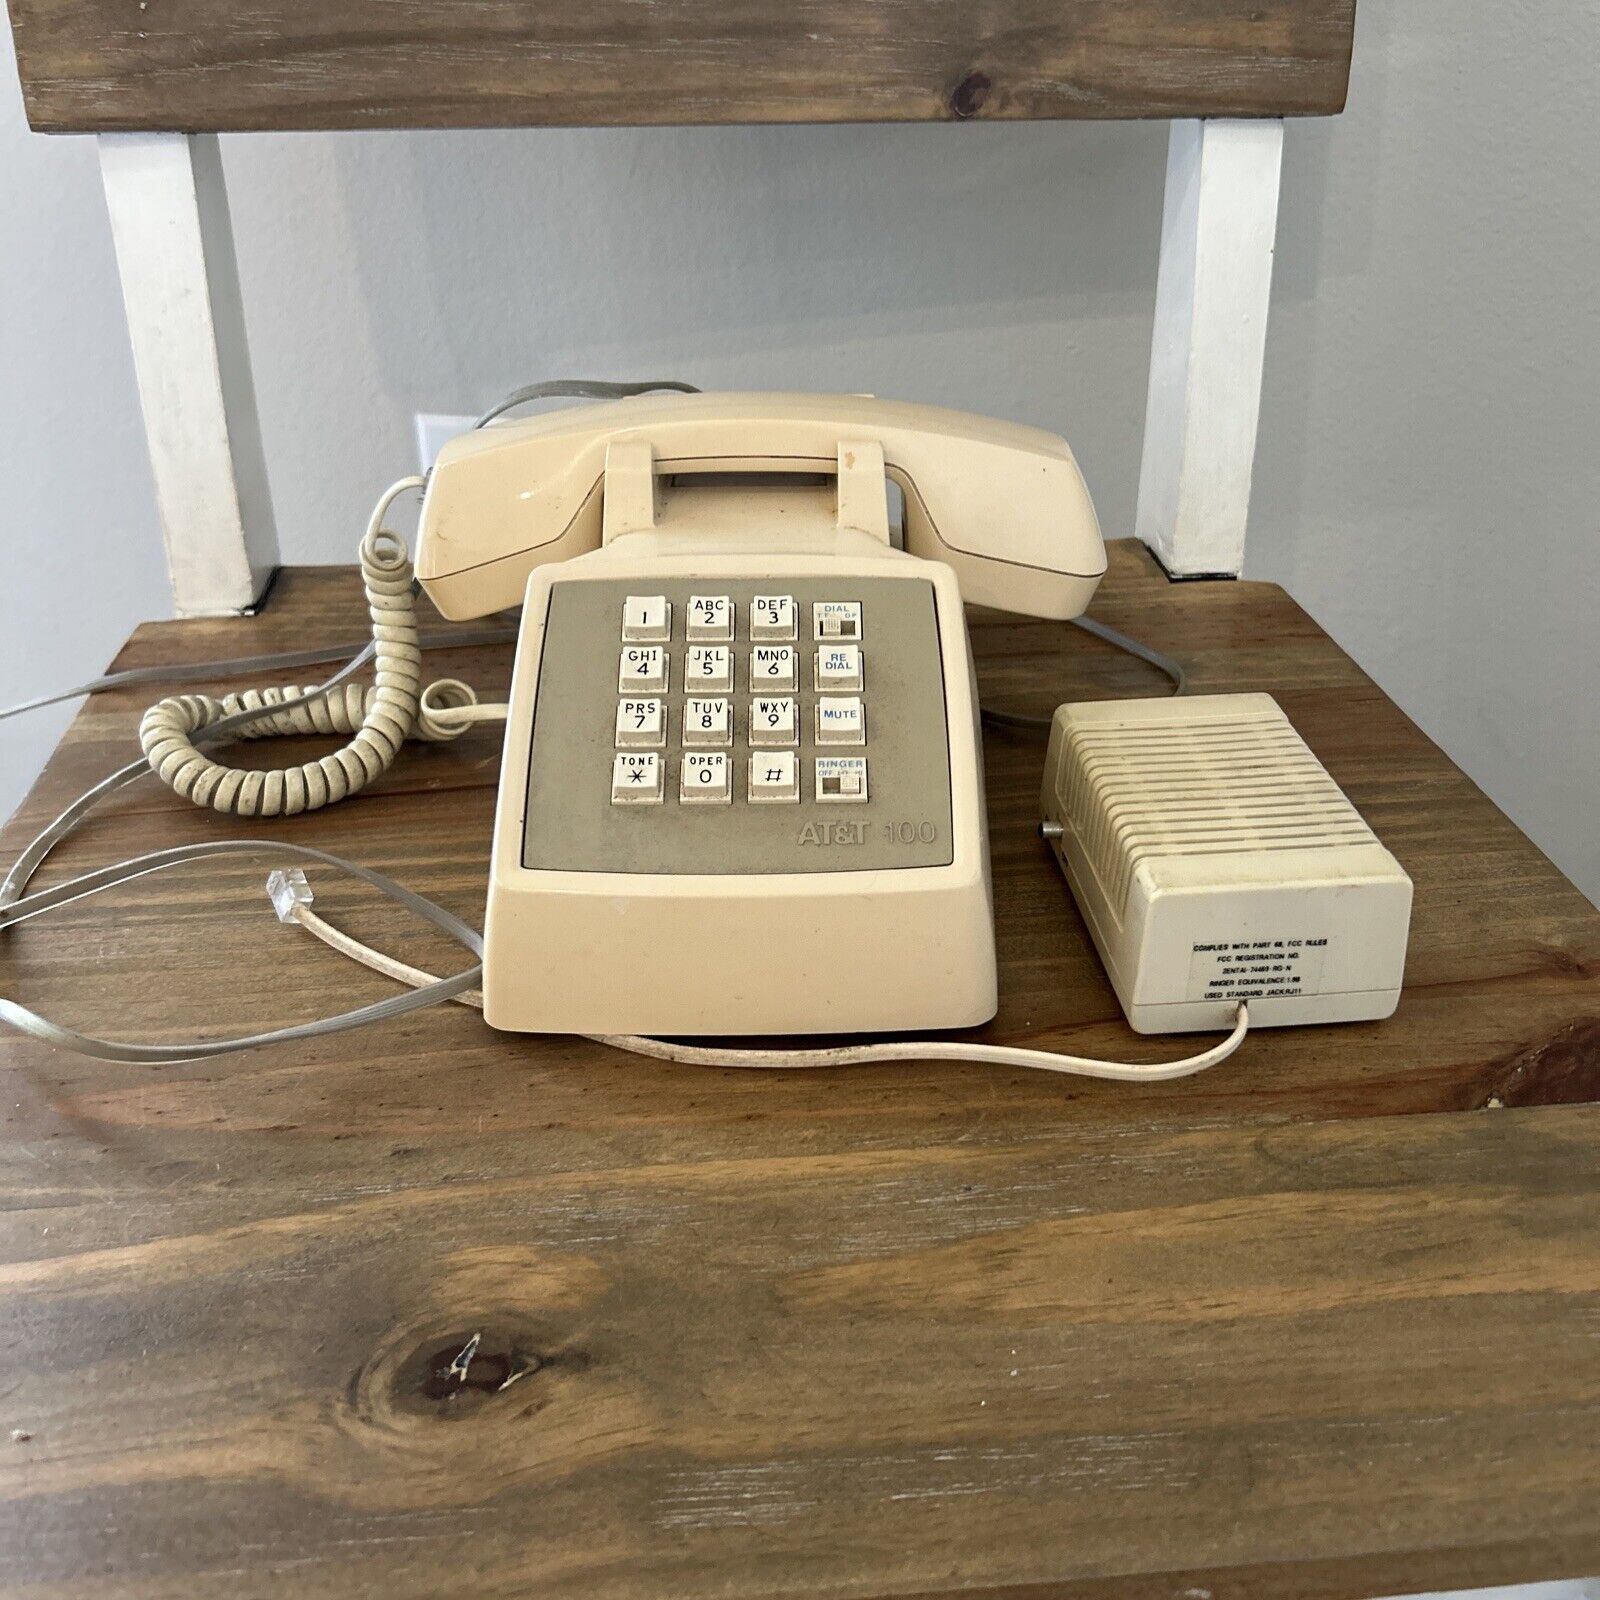 VINTAGE AT&T 100 BEIGE CORDED TELEPHONE WITH RINGER 